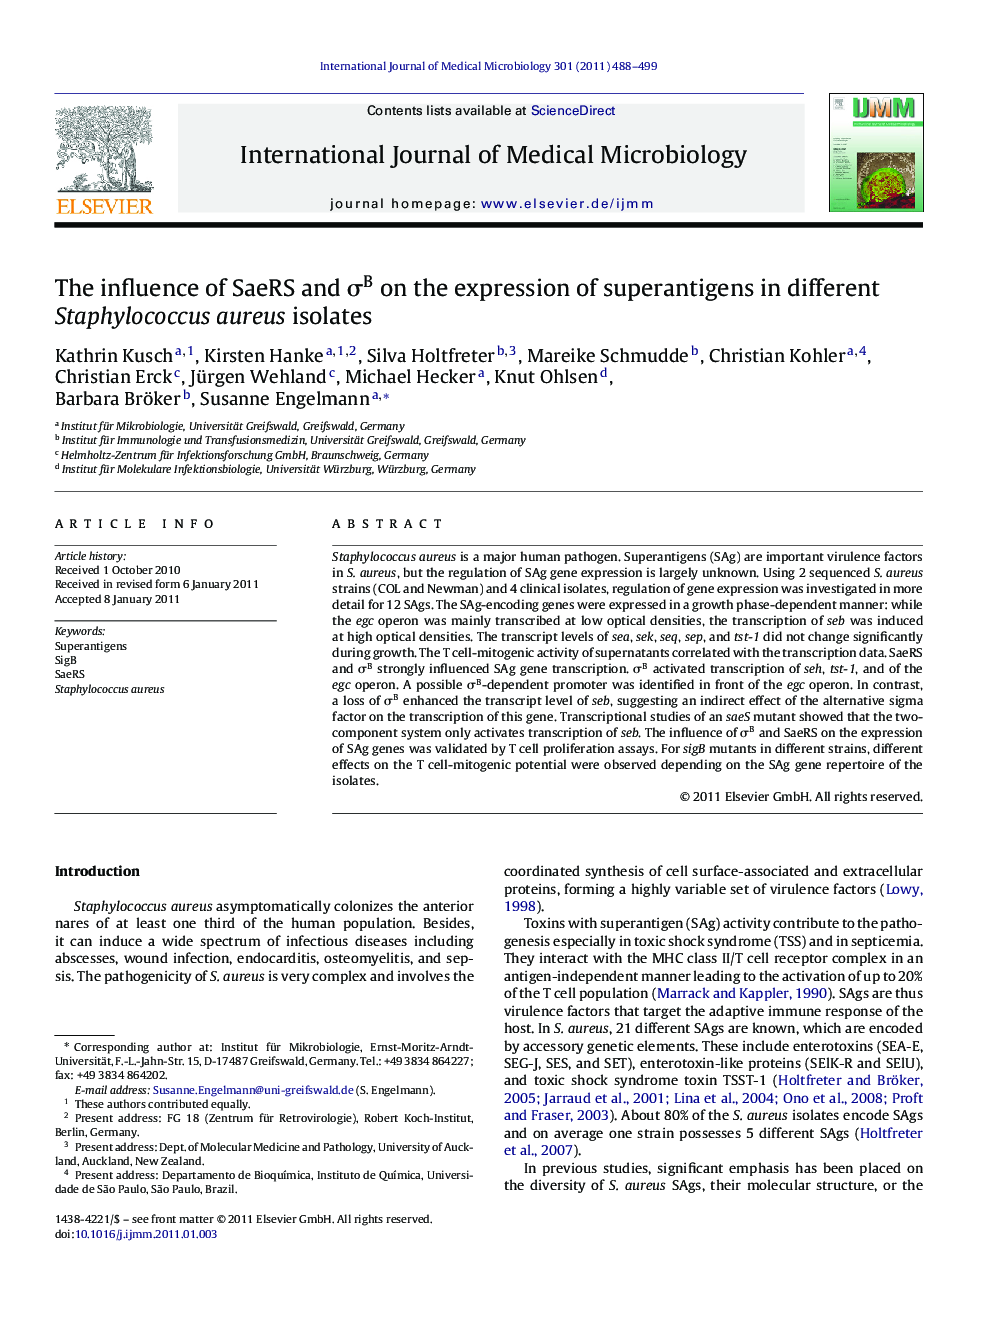 The influence of SaeRS and σB on the expression of superantigens in different Staphylococcus aureus isolates